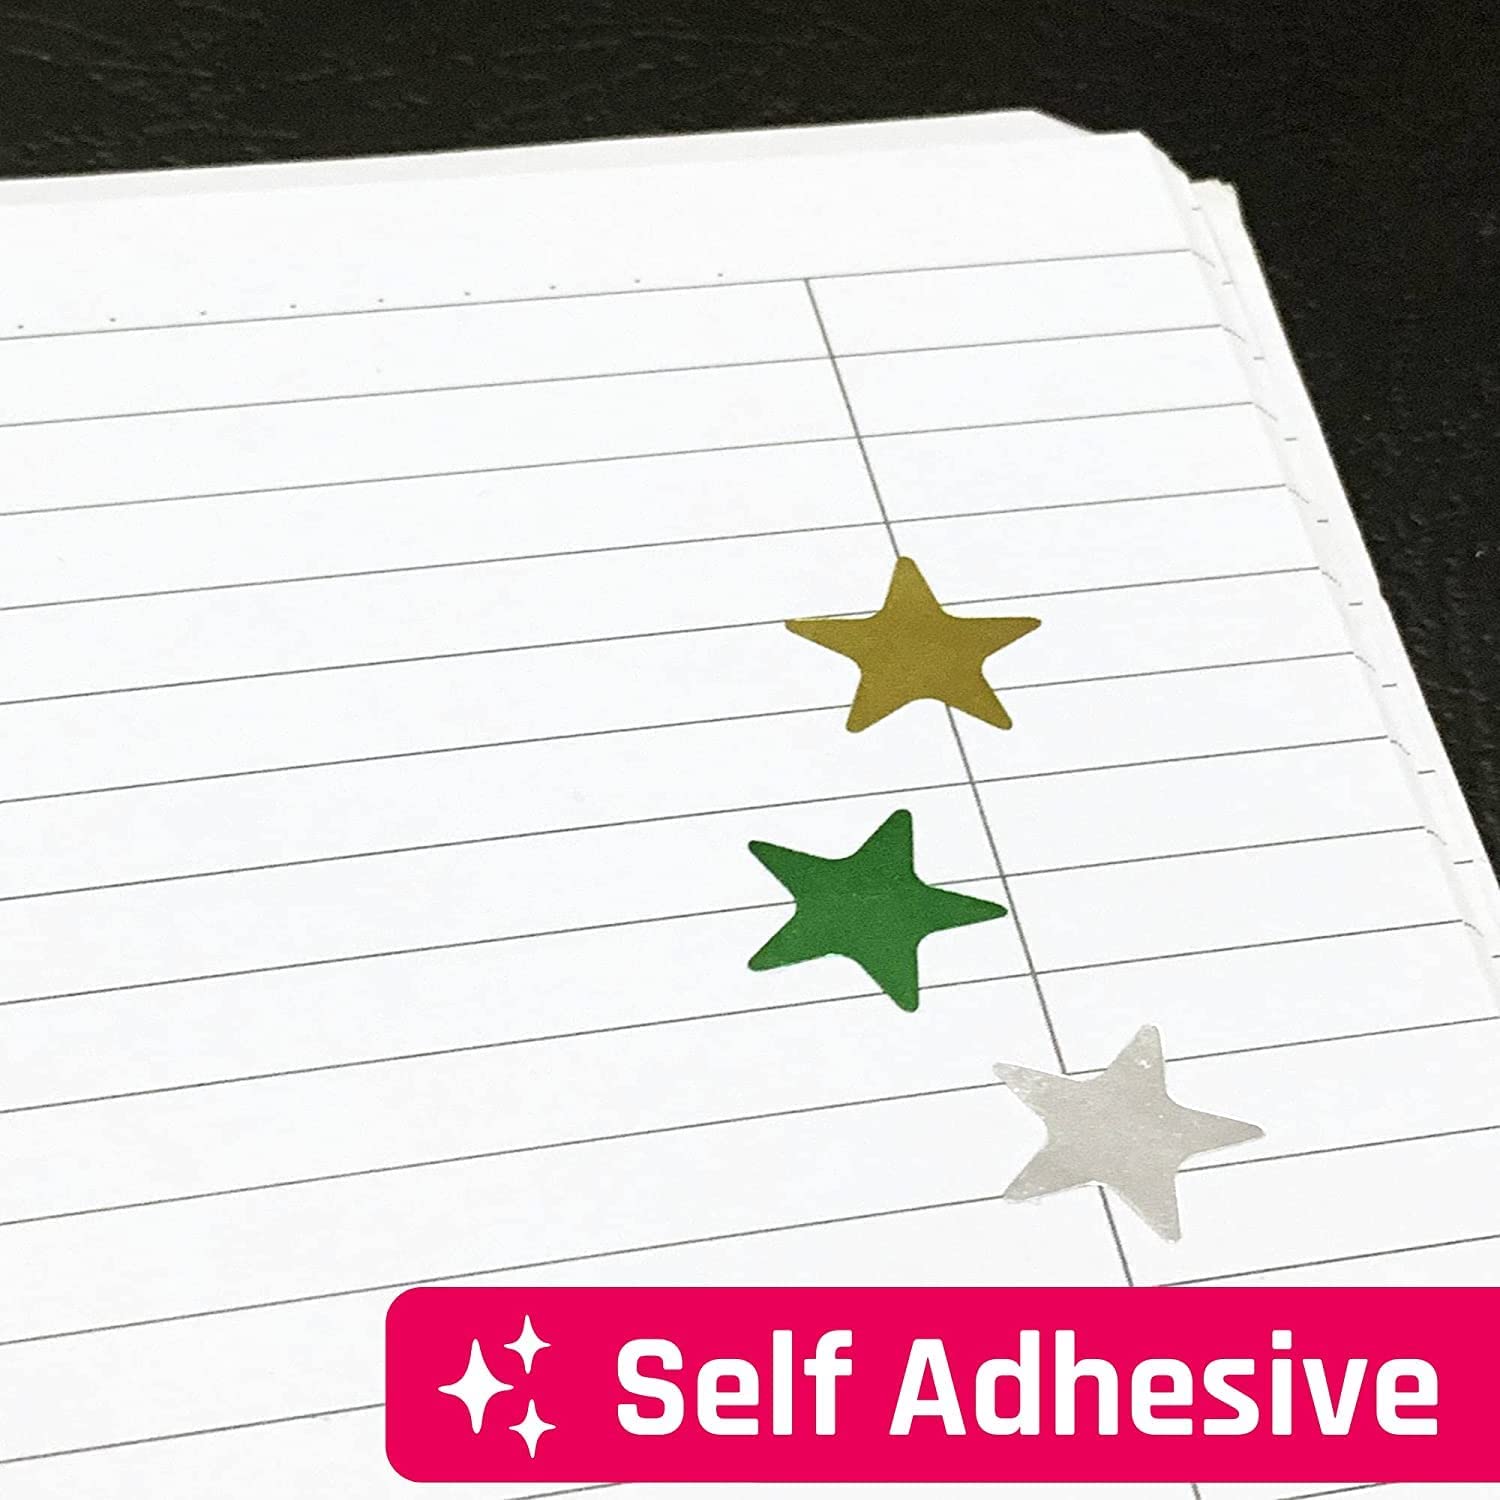 A set of adhesive stickers with a gold foil star design, 1000 pieces